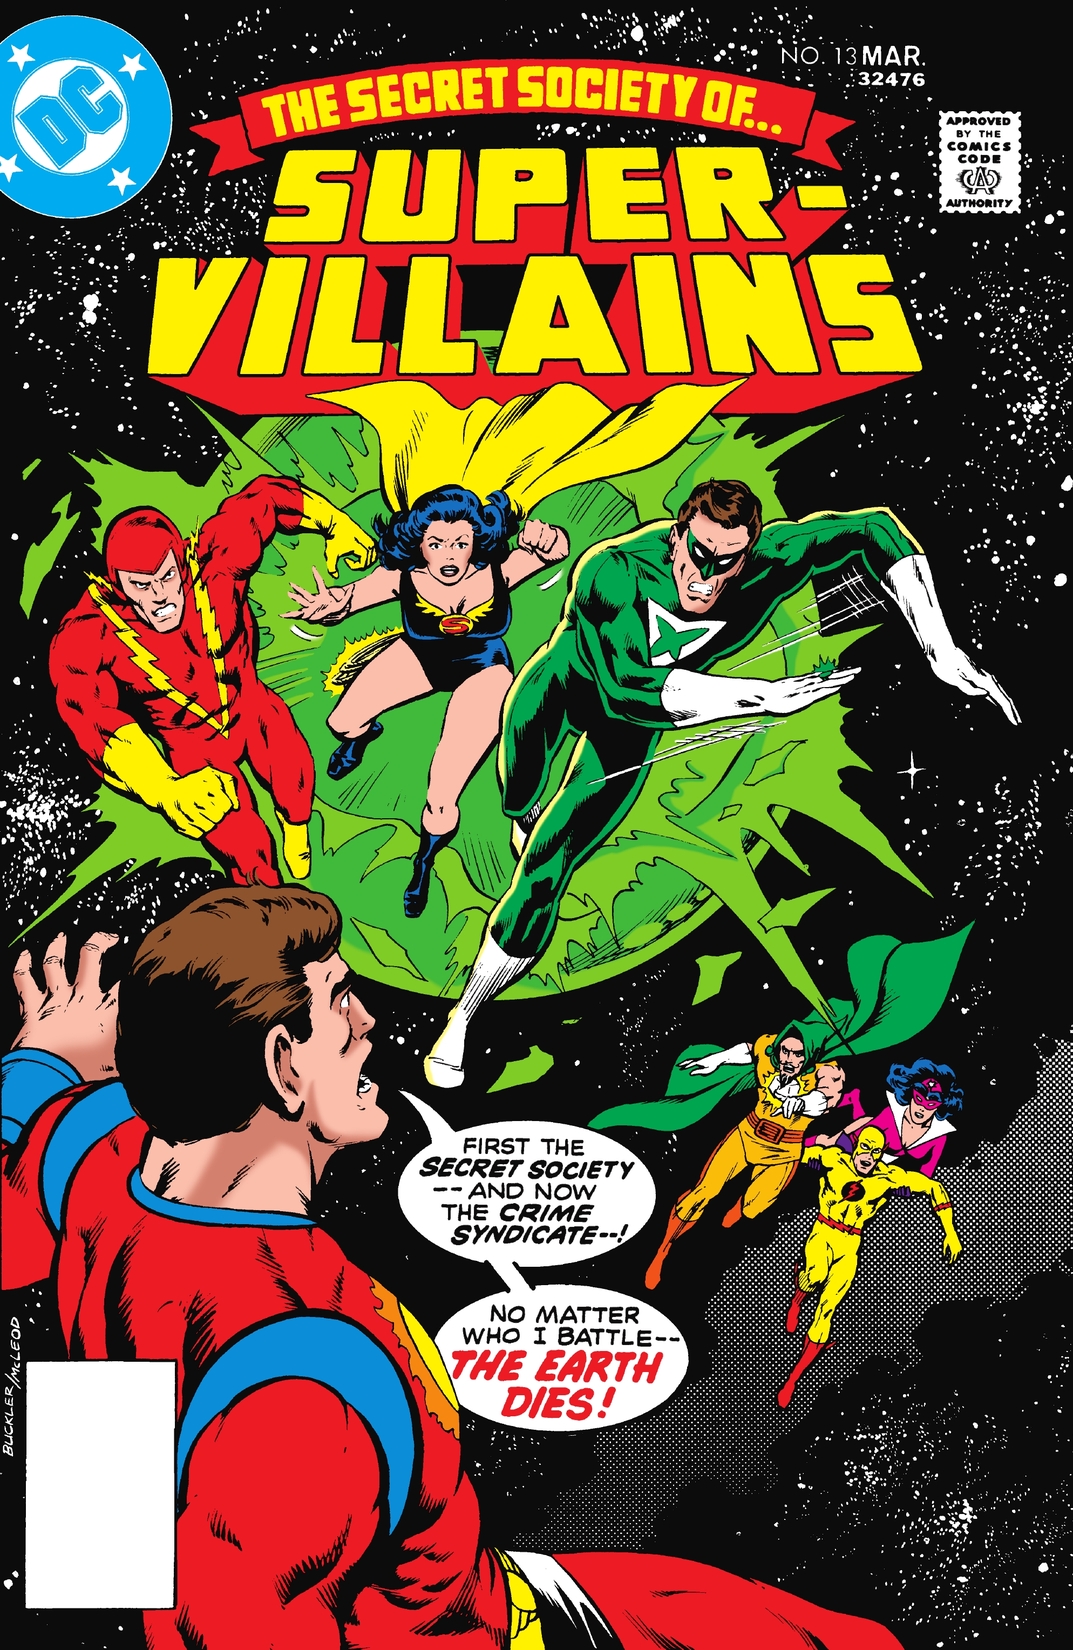 The Secret Society of Super Villains #13 preview images